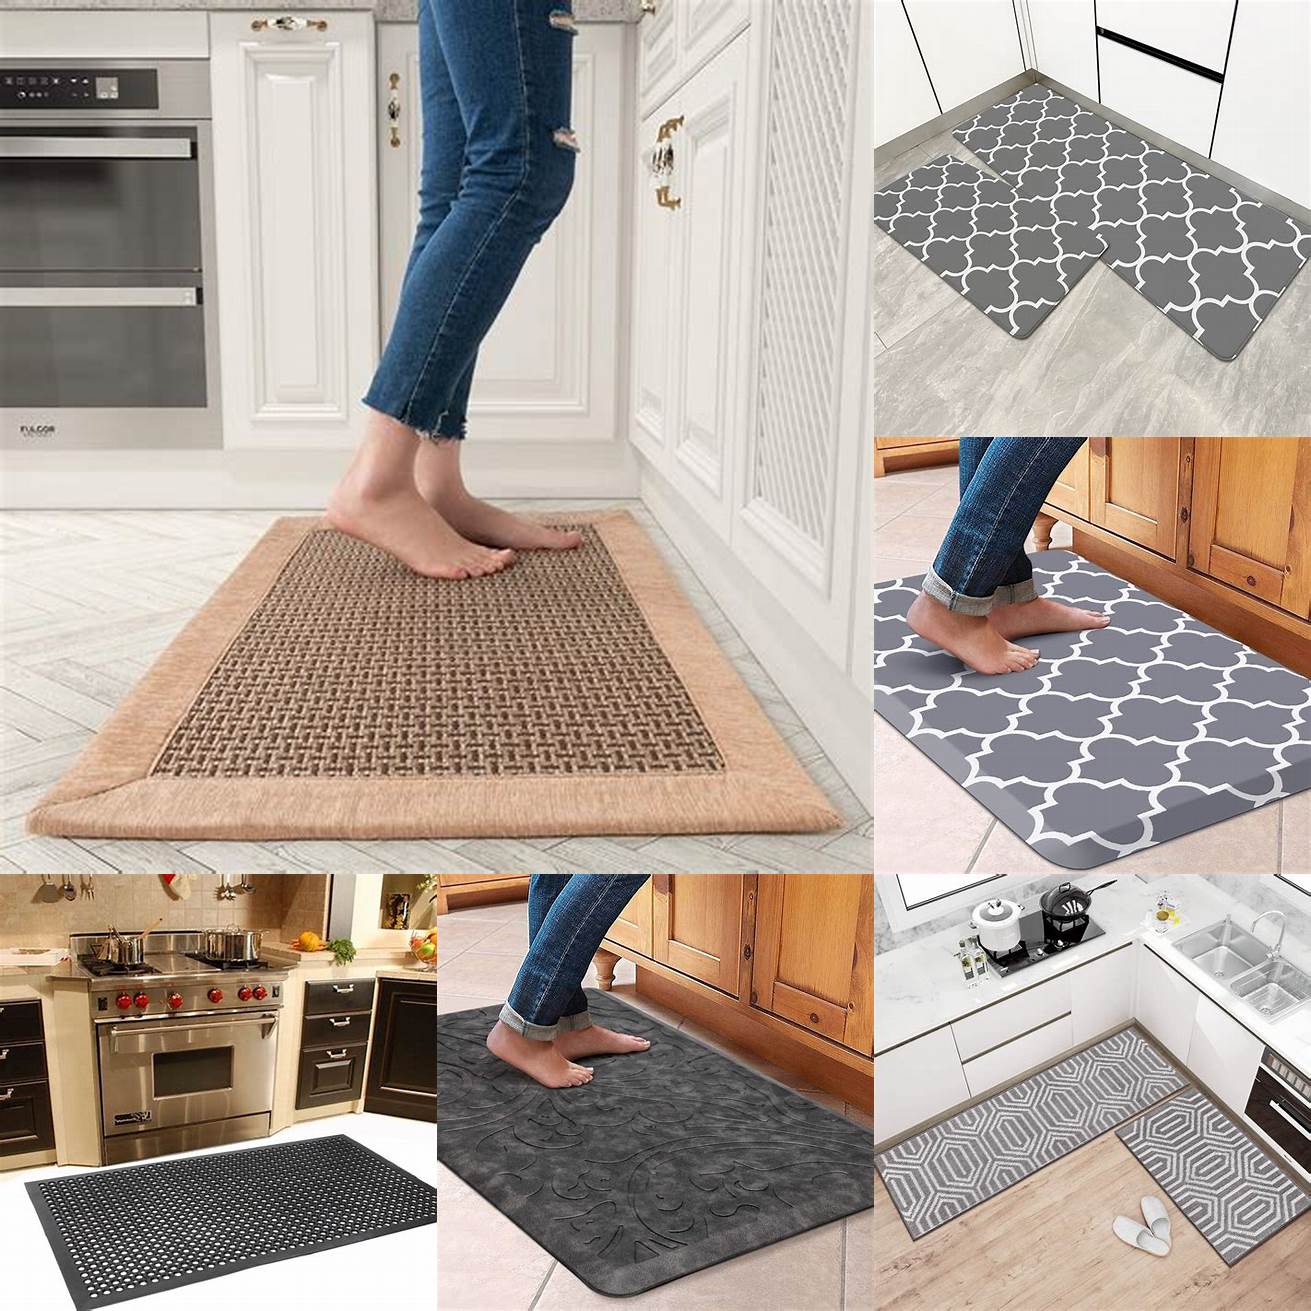 Easy to clean - Kitchen floor mats are easy to clean and maintain Most mats can be wiped down with a damp cloth or run under the faucet